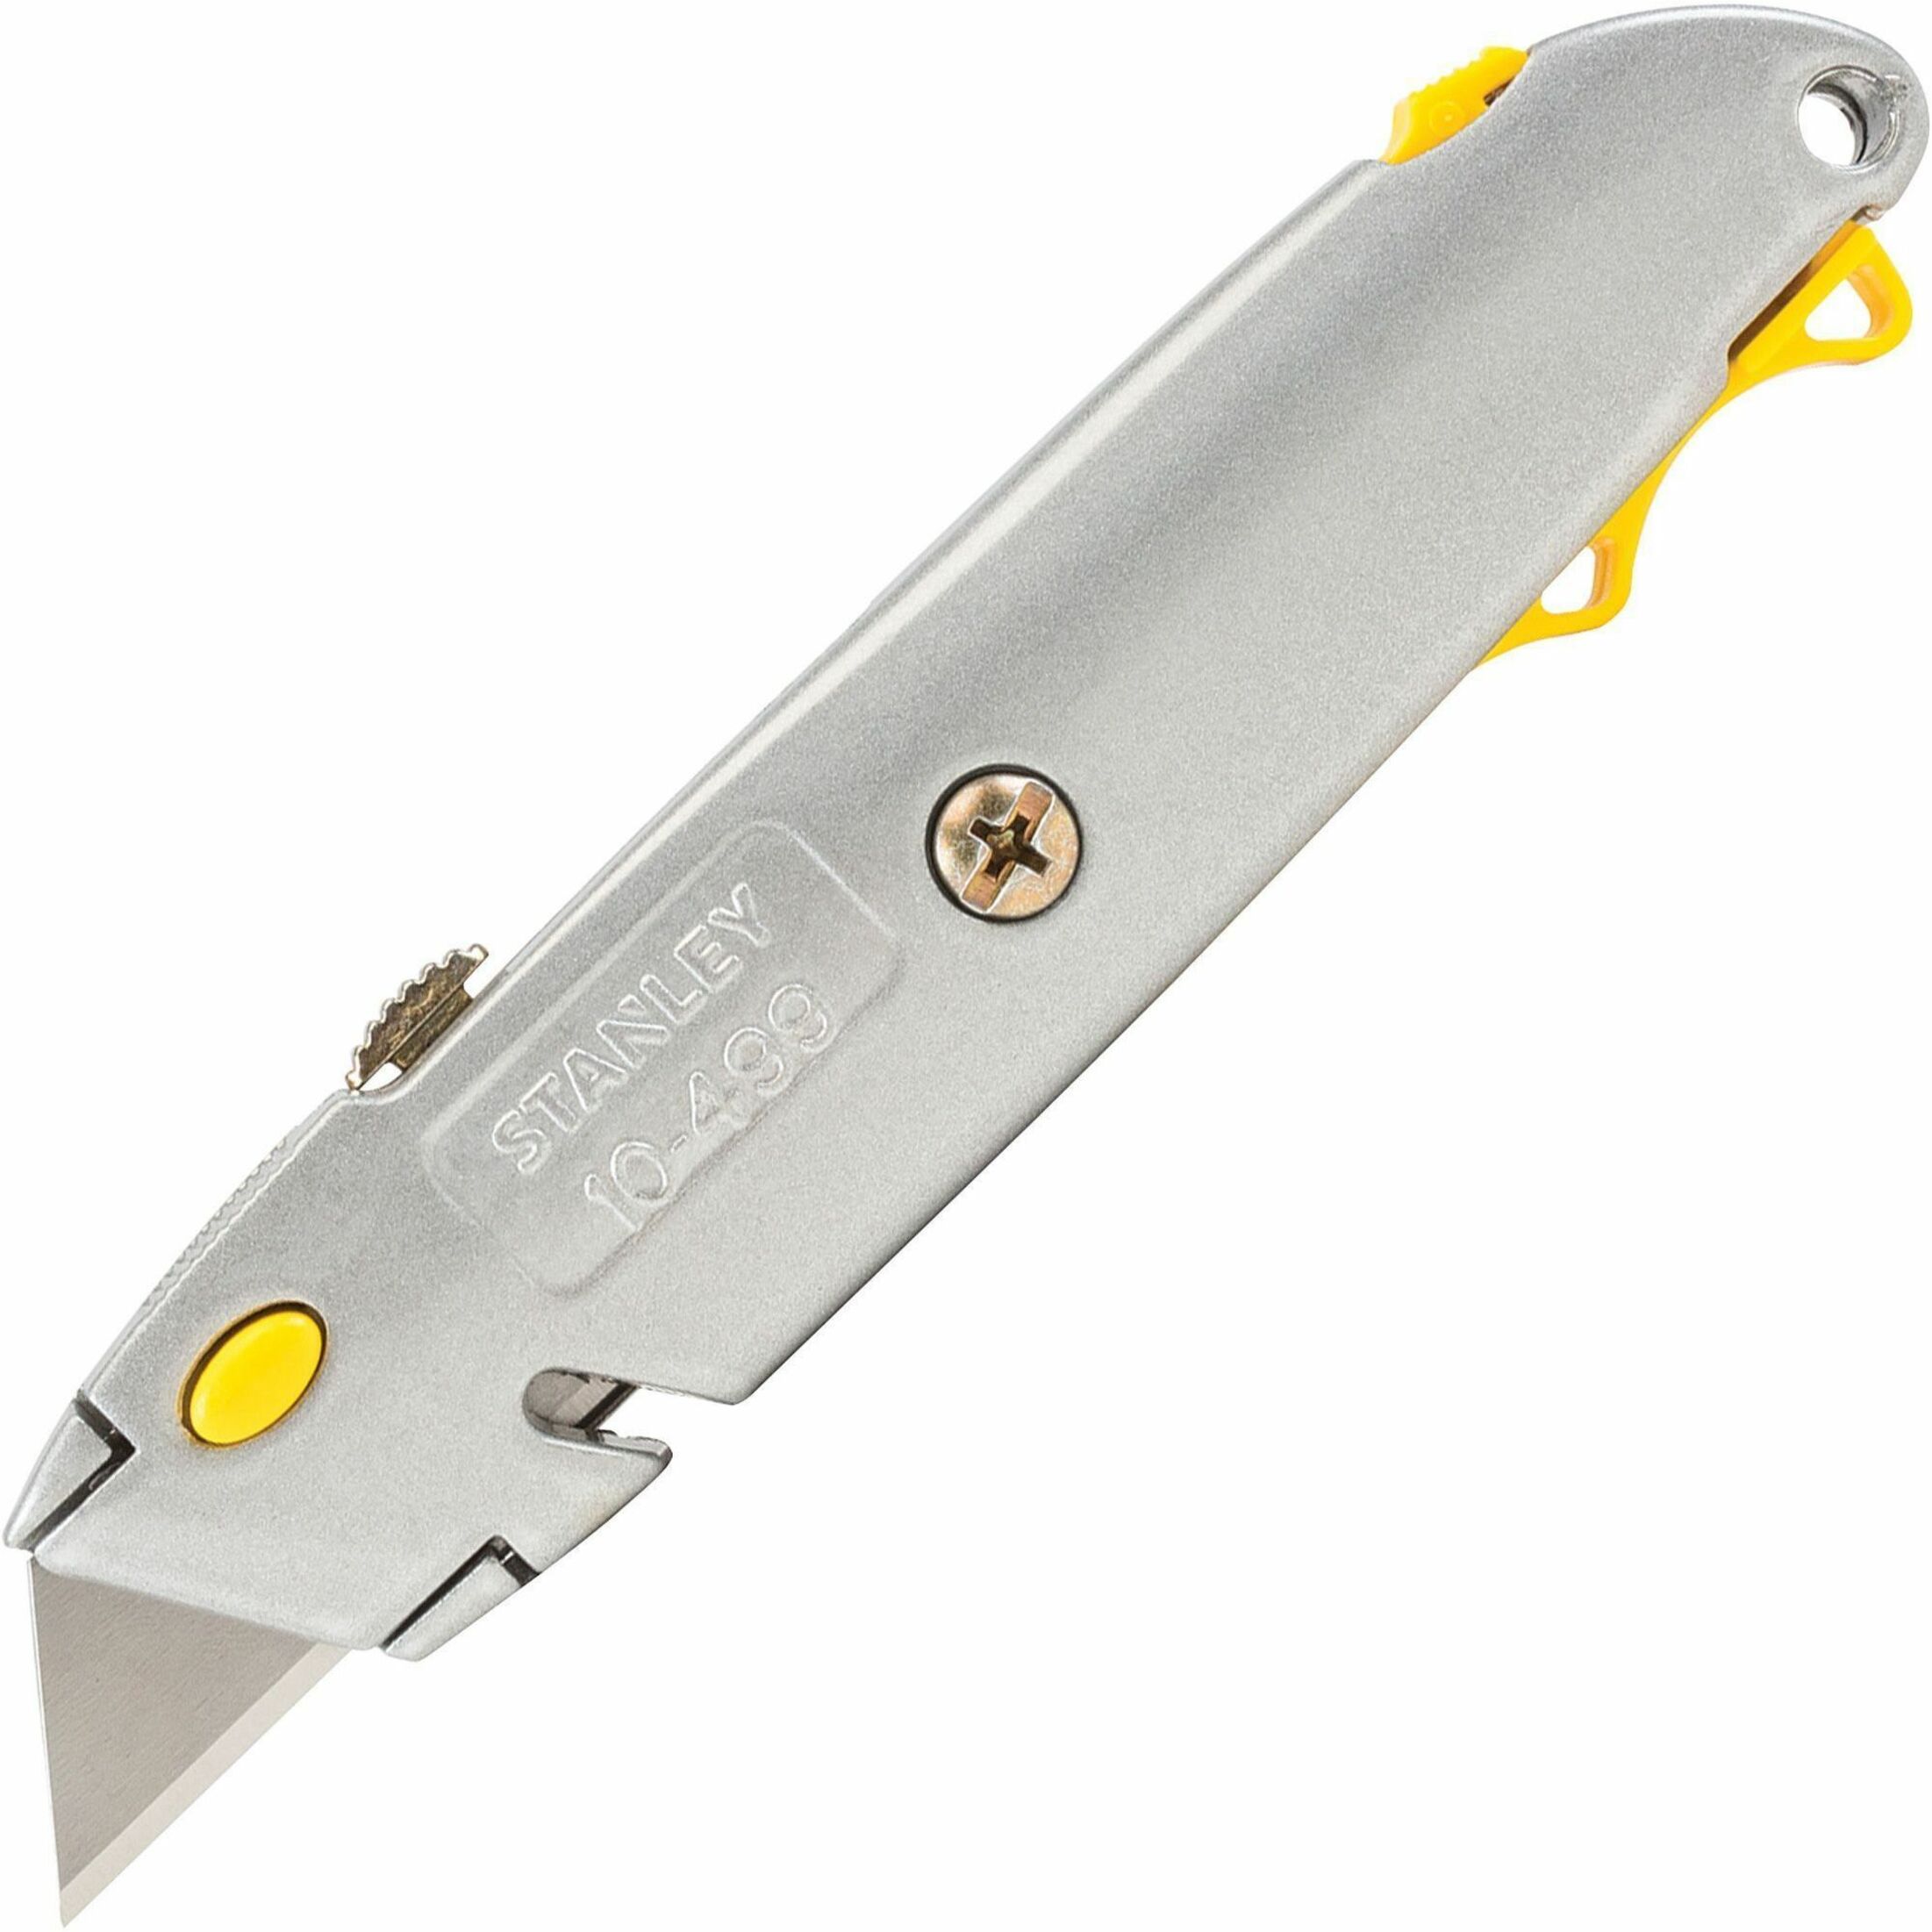 Stanley, BOS10499, Quick-Change Utility Knife, 1 Each, Black,Silver - image 1 of 4